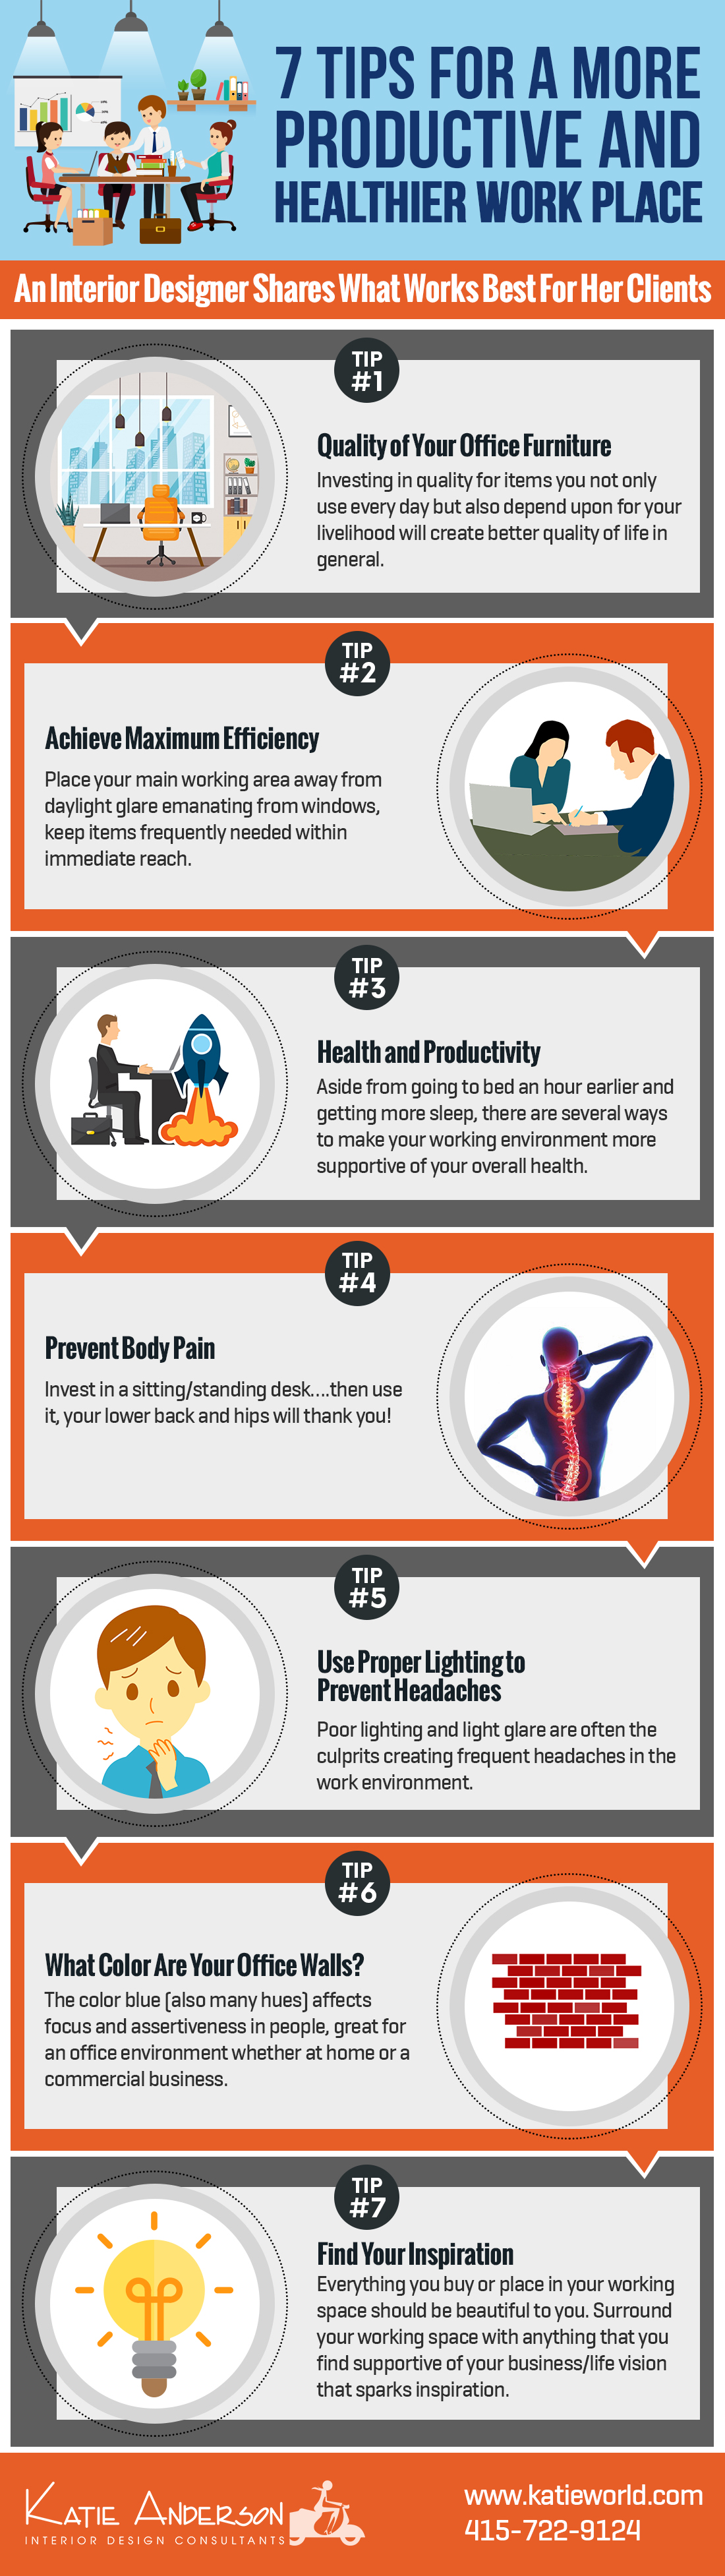 infographic-7-tips-more-productive-healthier-work-place